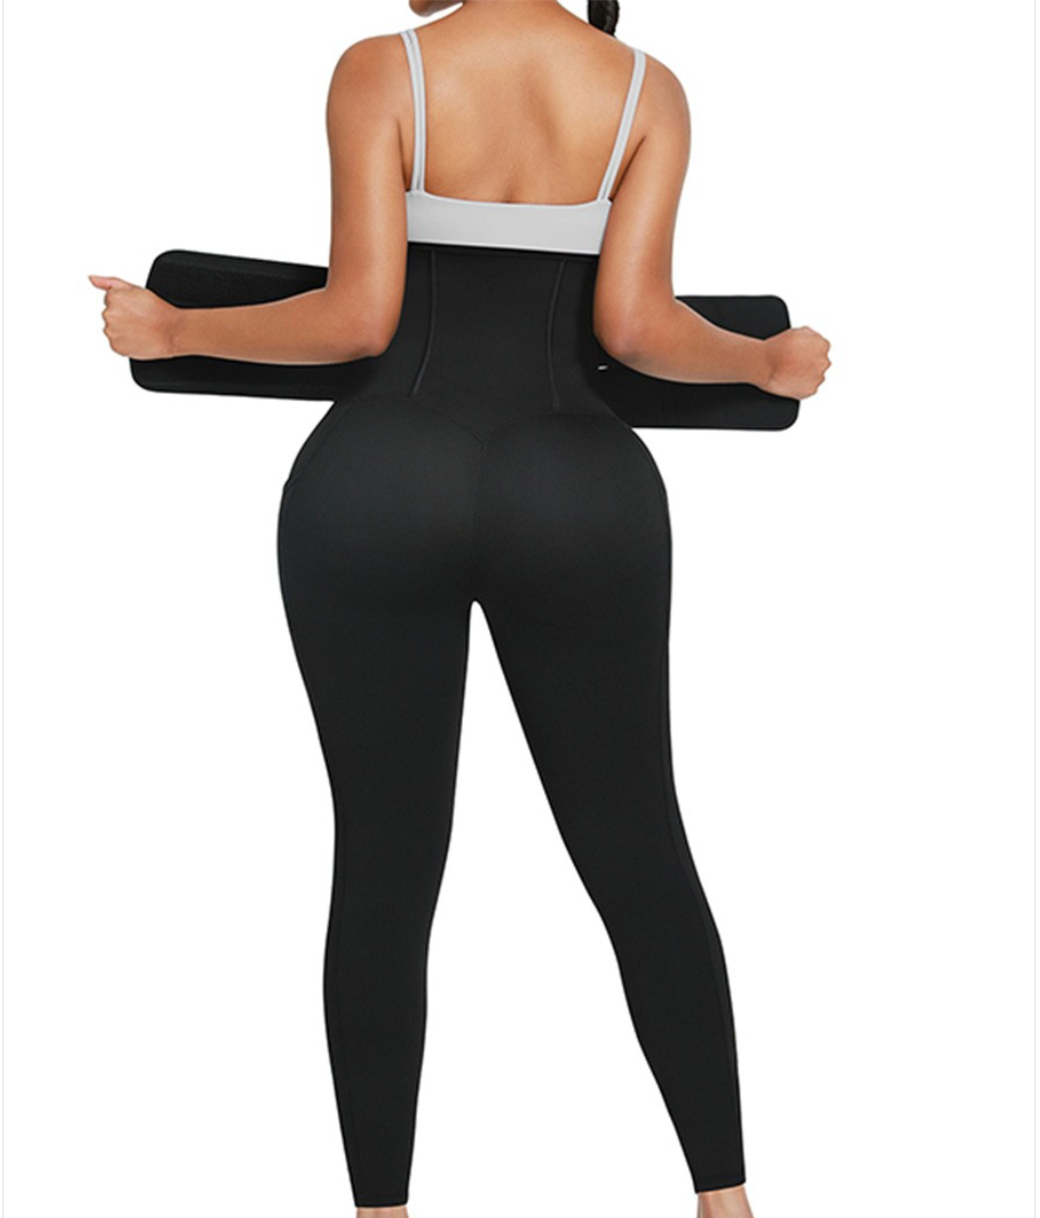 Black Double Belt Waist Trimmer Tummy Control Leggings With Blue Pu Coated Lining - Snatch Bans